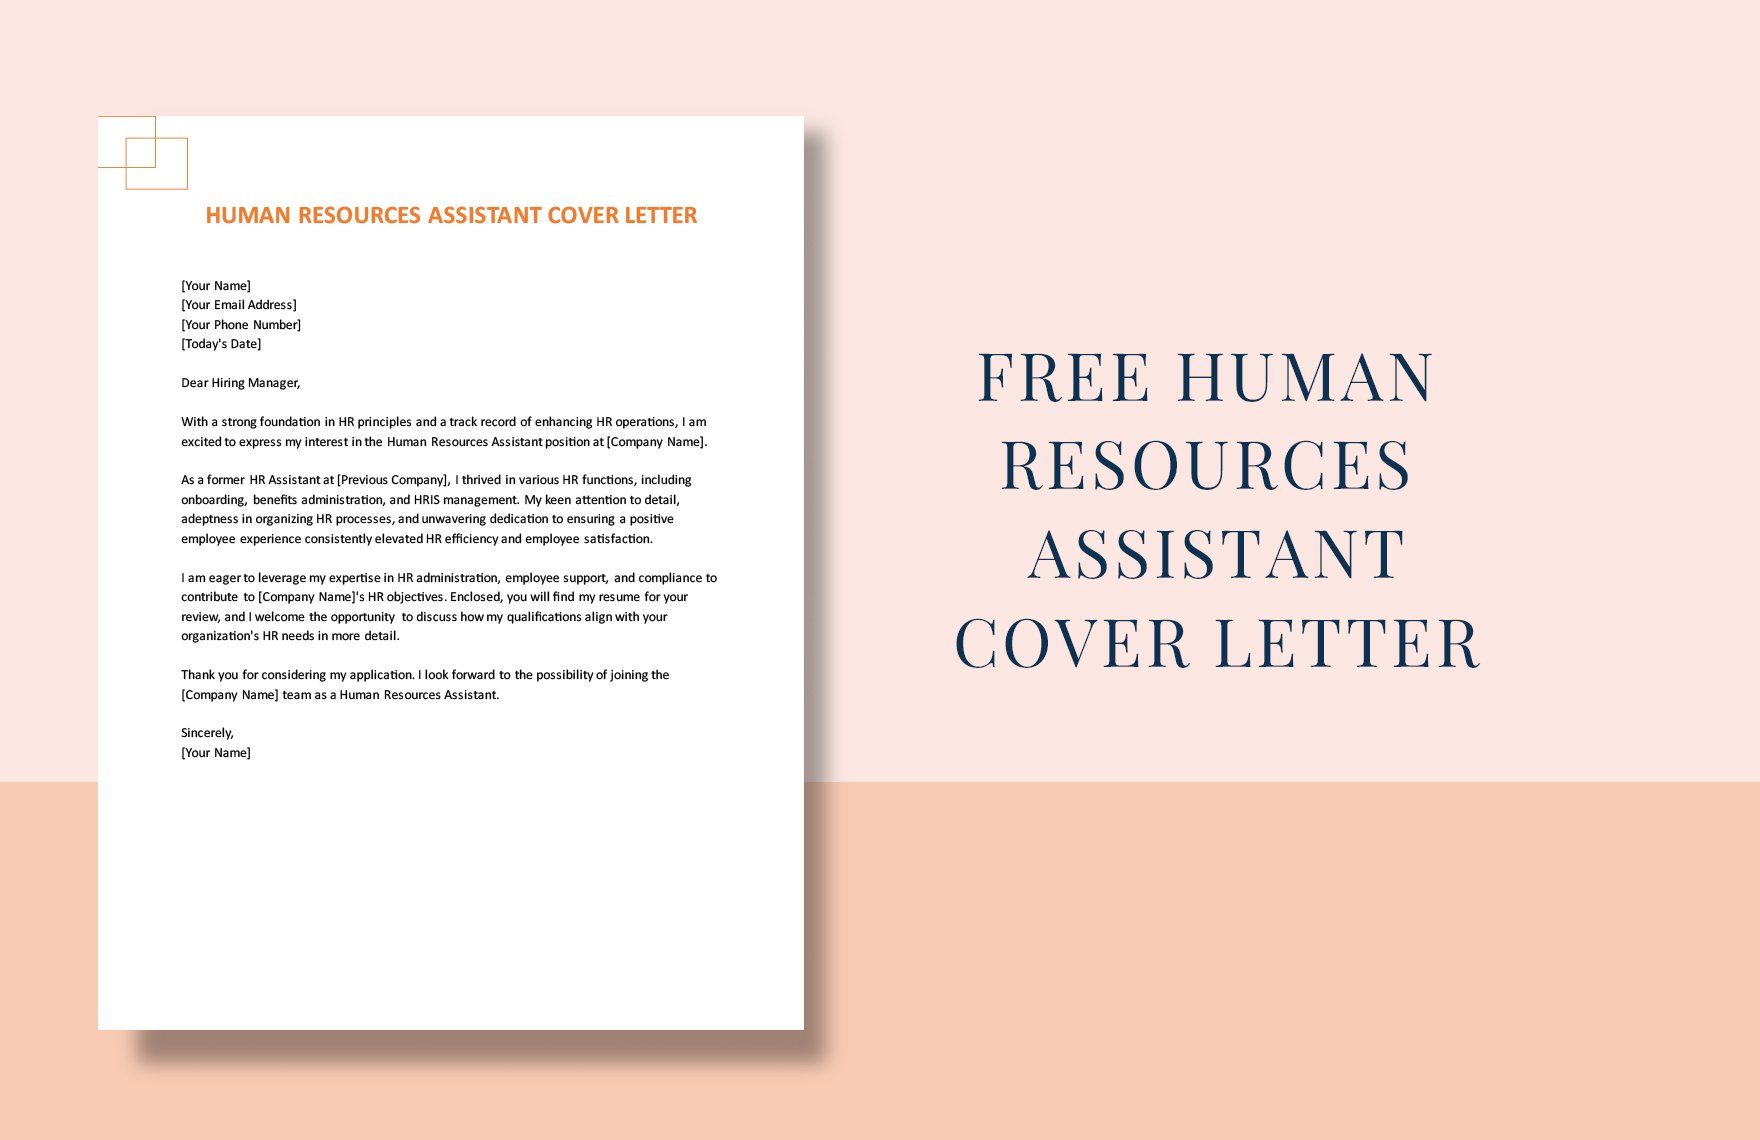 Human Resources Assistant Cover Letter in Word, Google Docs, PDF